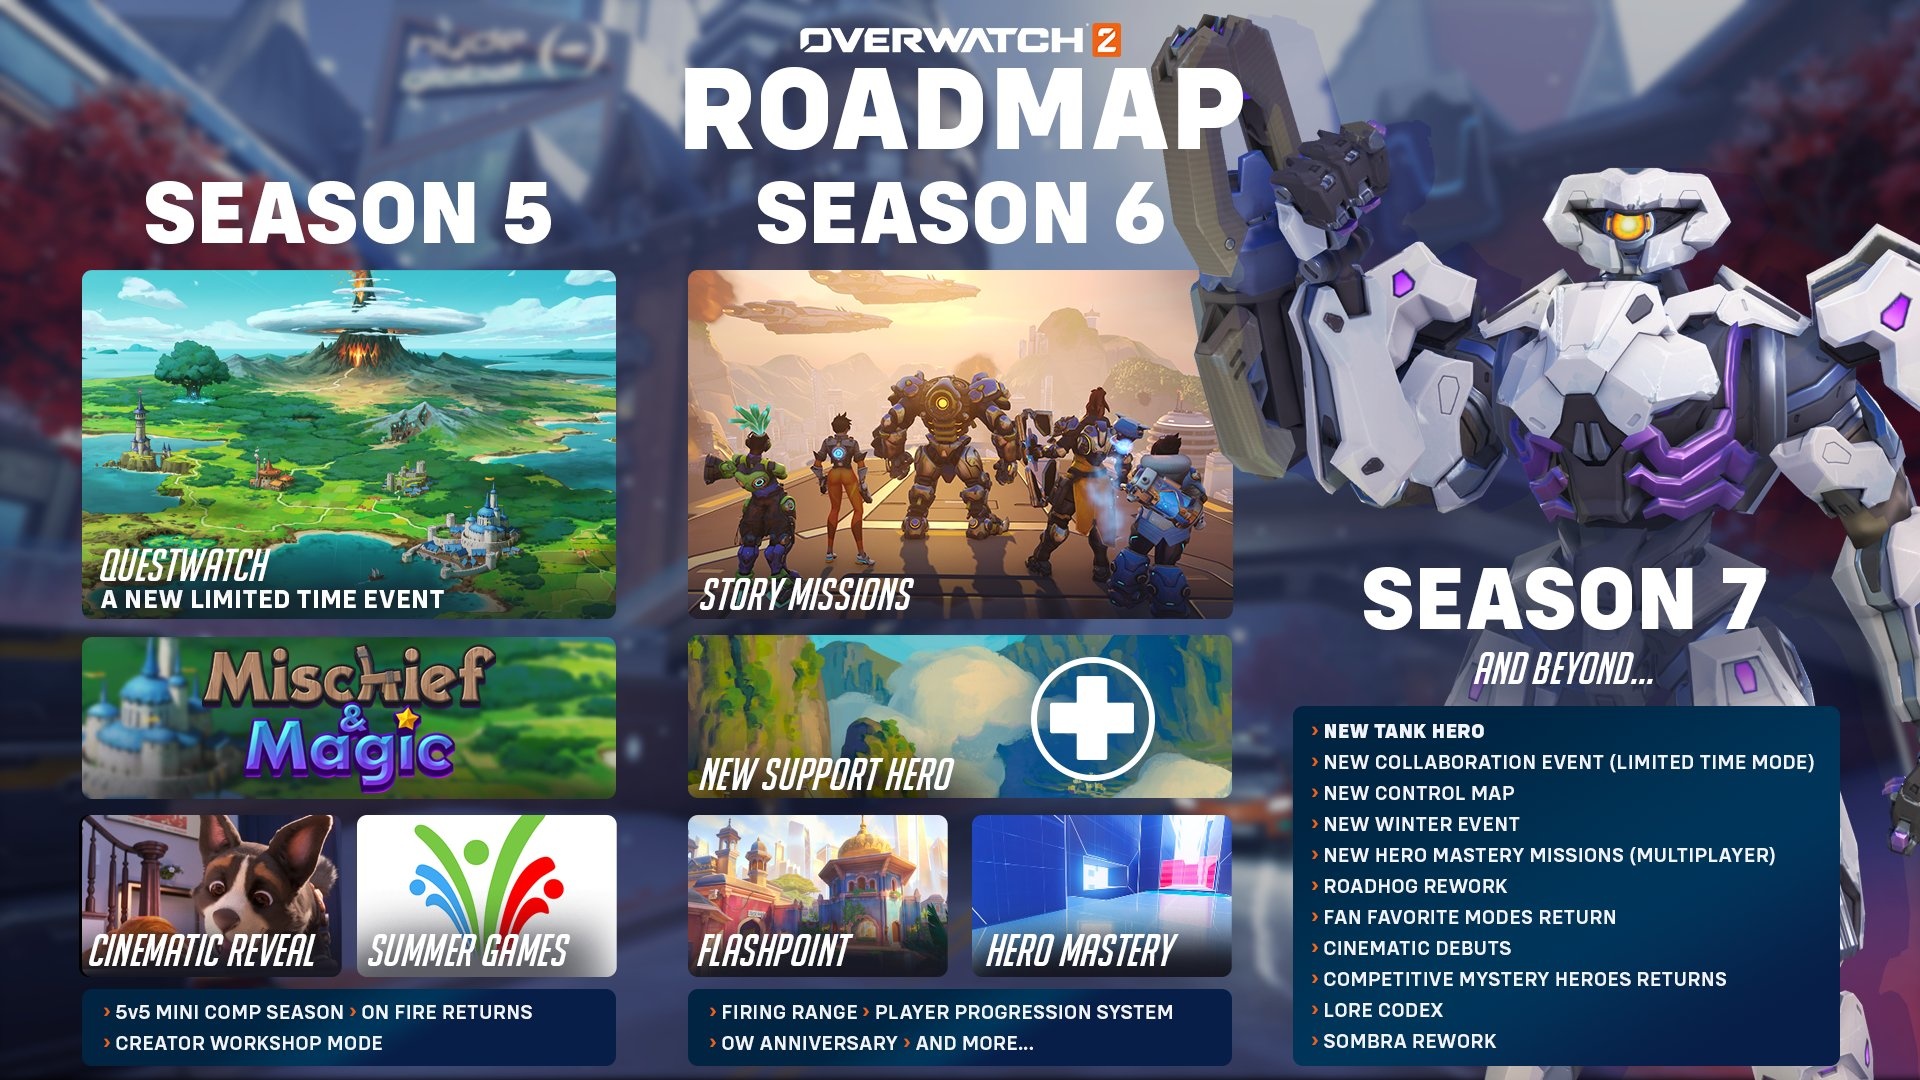 (Season 6 is set to be the first release of story missions for Overwatch 2.)